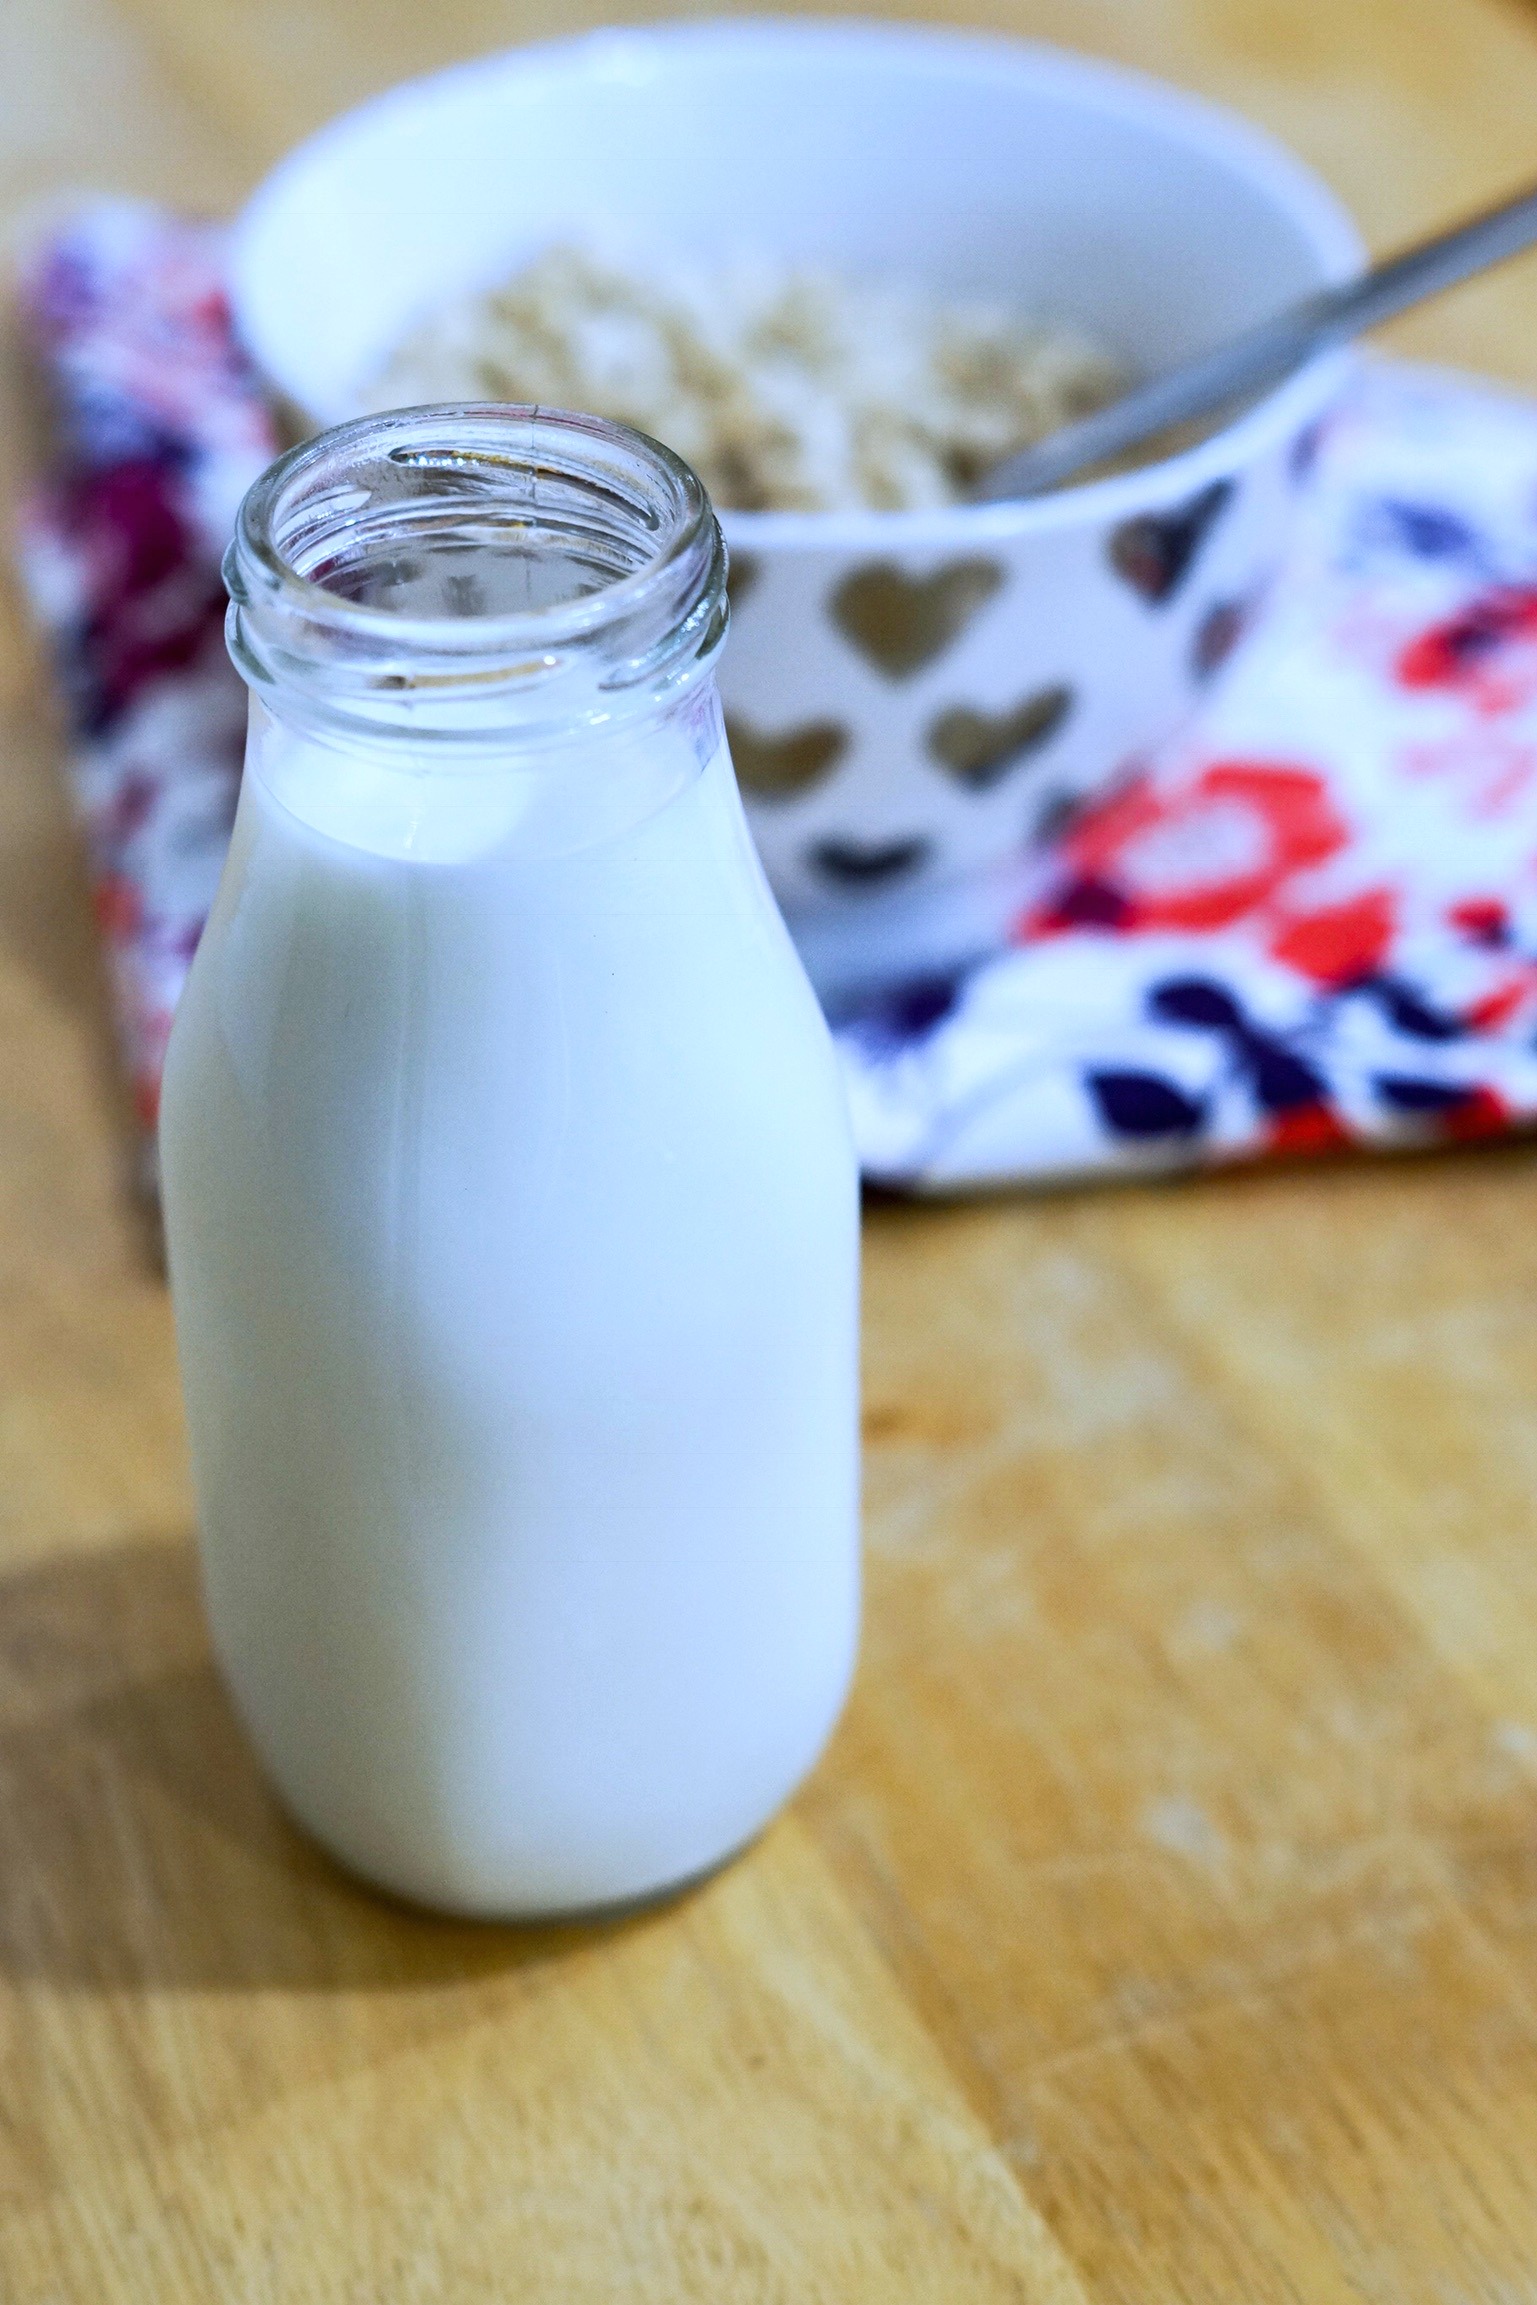 Dairy milk has just three ingredients - milk, vitamin A and vitamin D. Check out these easy ways to incorporate milk into a balanced diet.